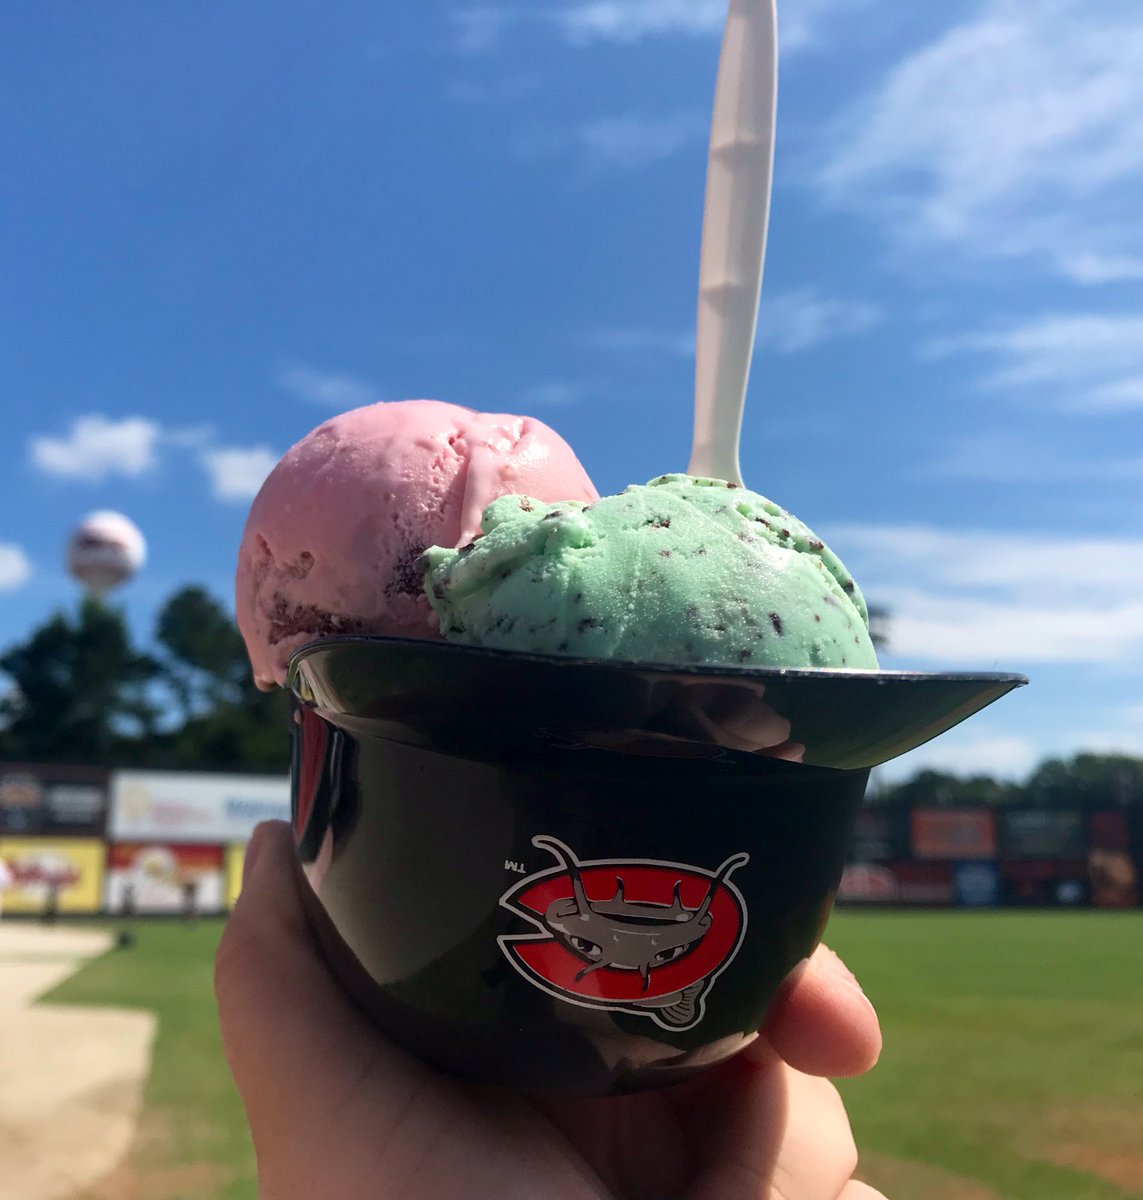 Day three without baseball.Here’s a picture of ice cream in a helmet because all ice cream hits different when served in a mini helmet.